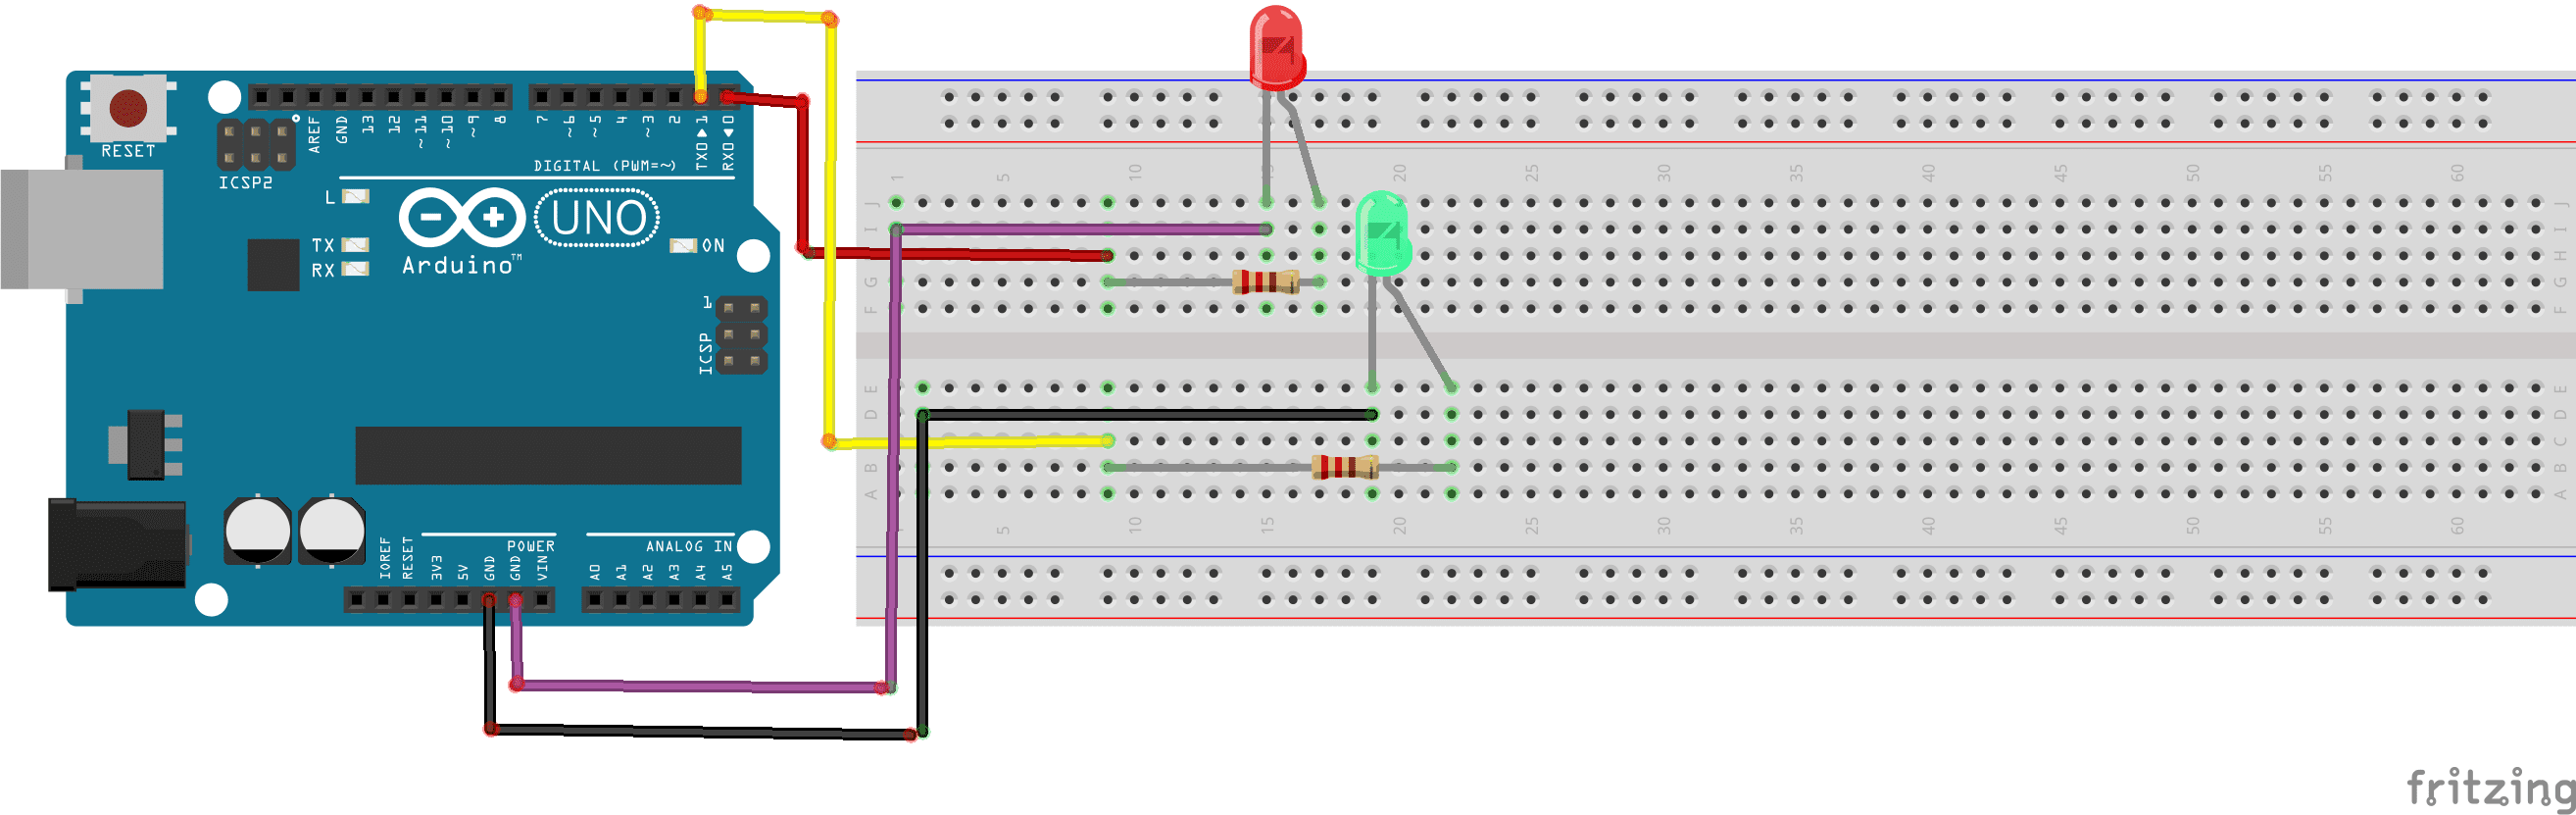 L5 Blinking Two LEDs  Physical Computing